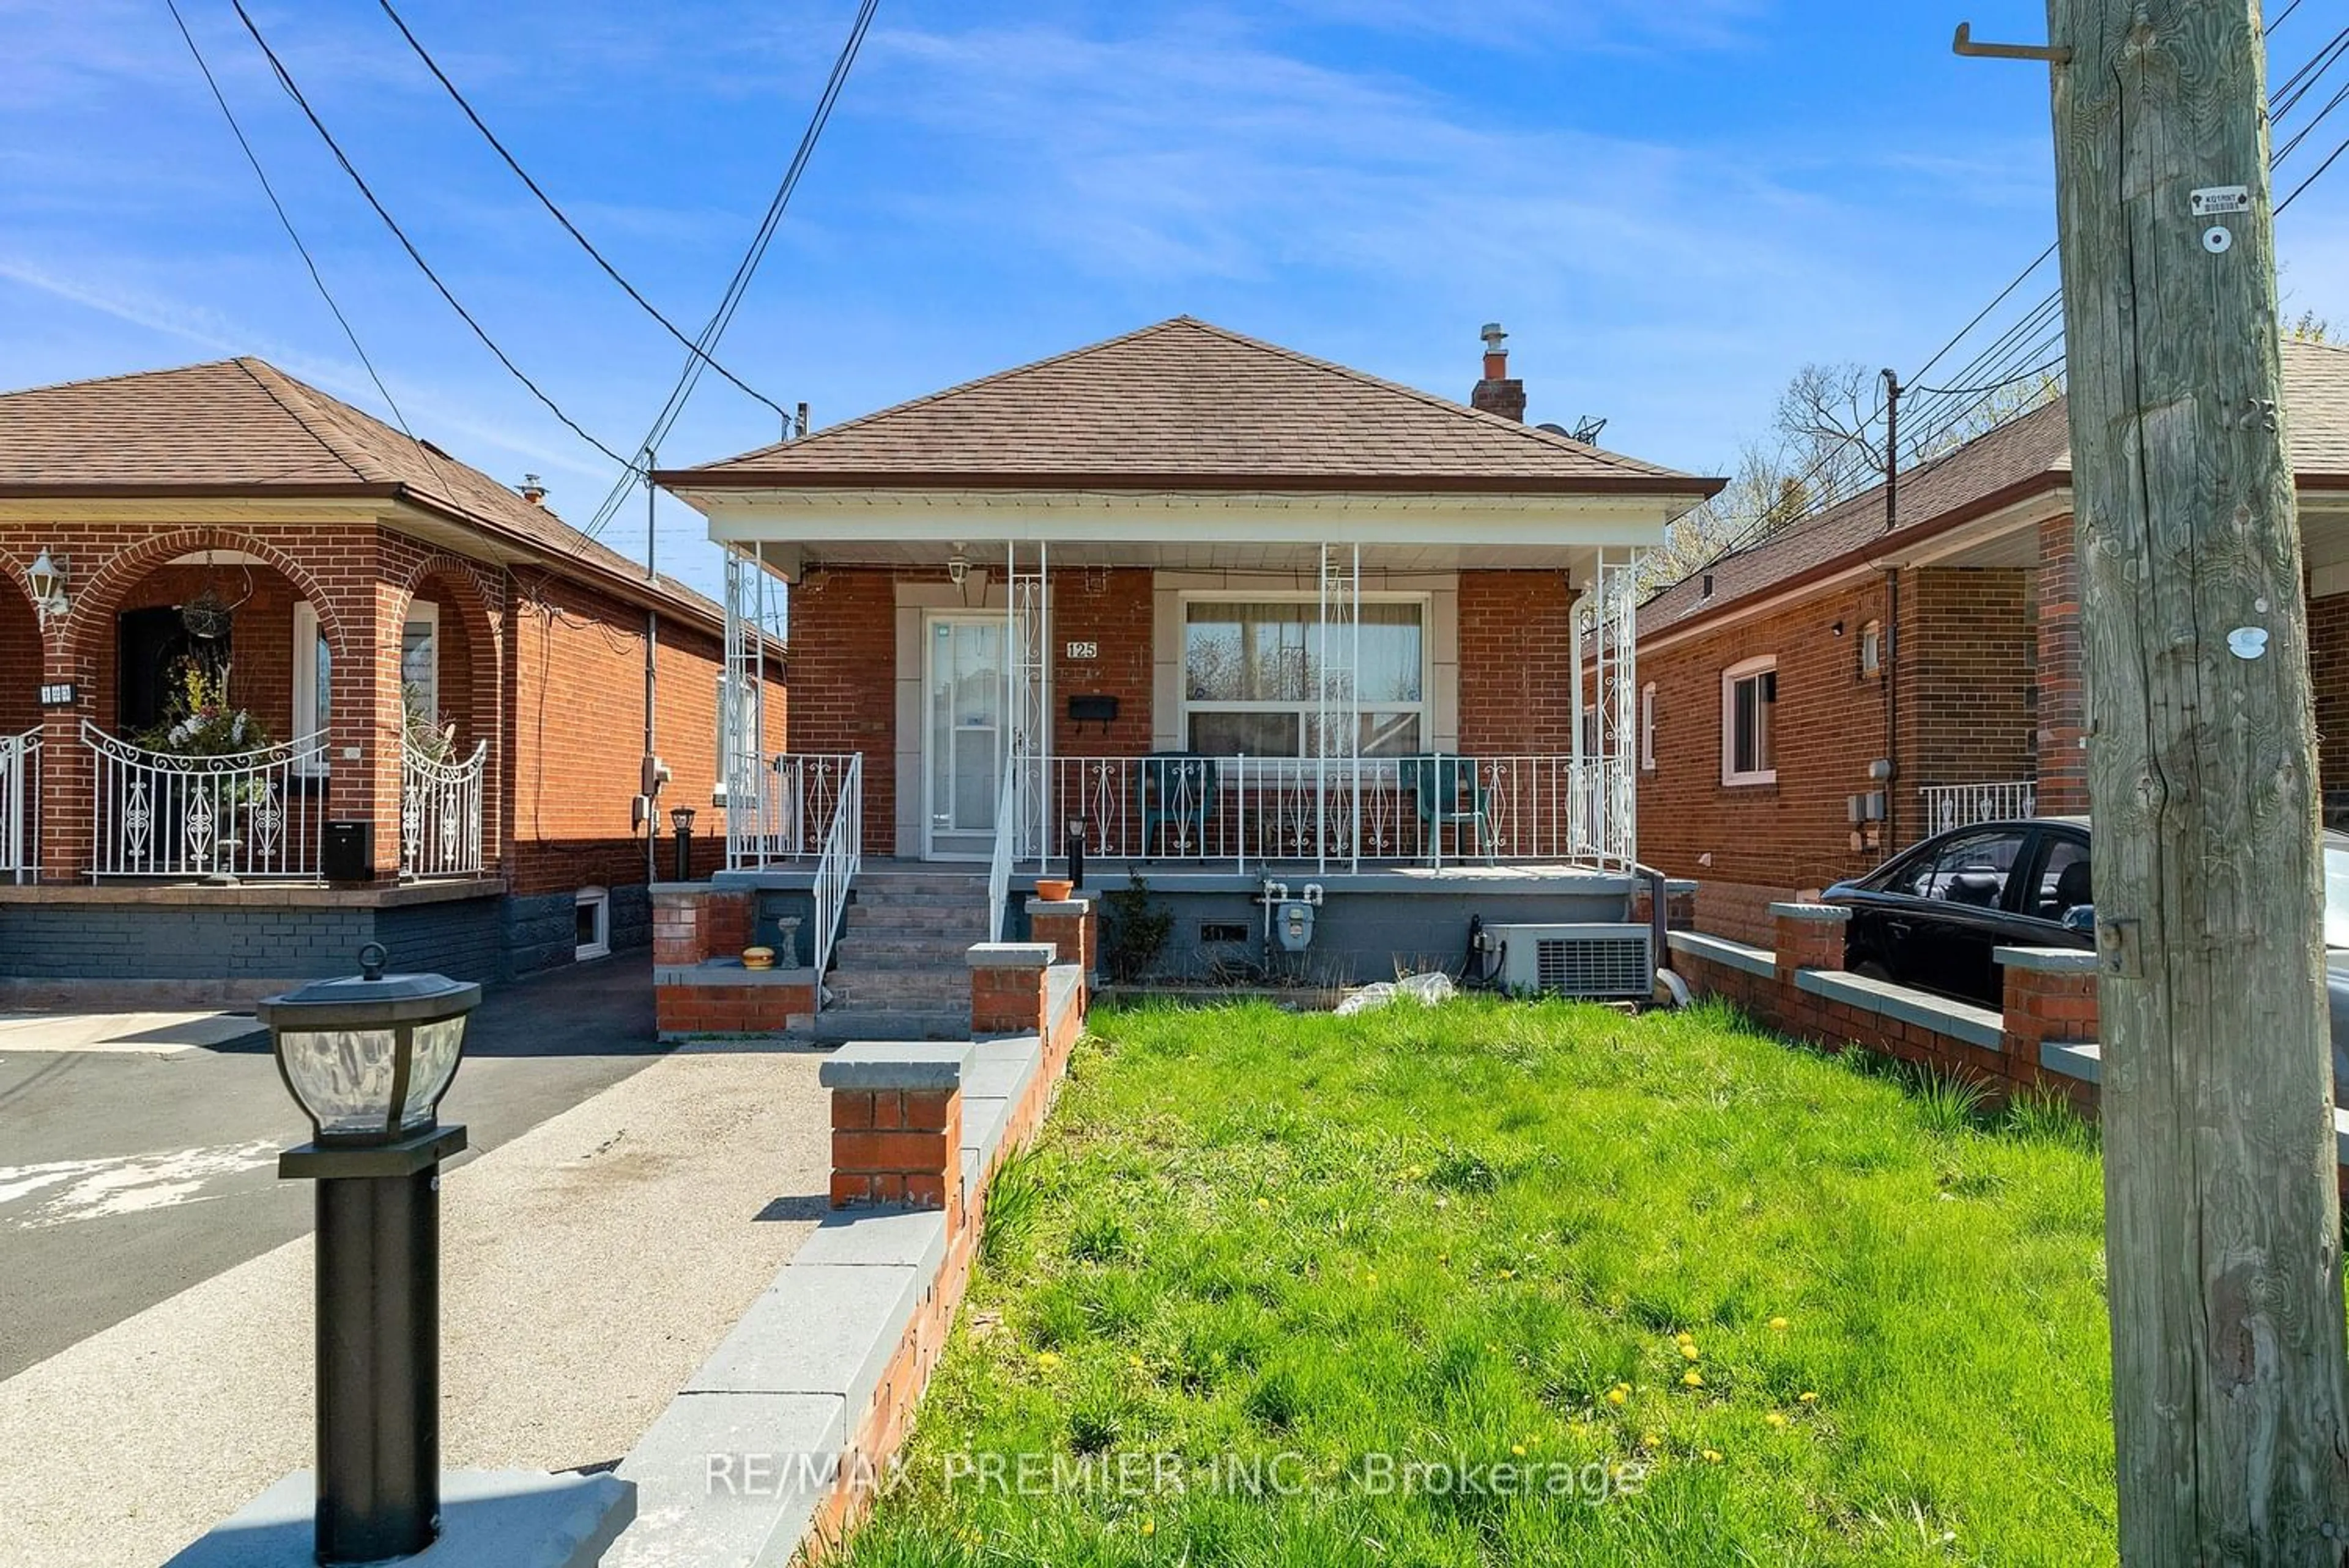 Frontside or backside of a home for 125 Foxwell St, Toronto Ontario M6N 1Y9